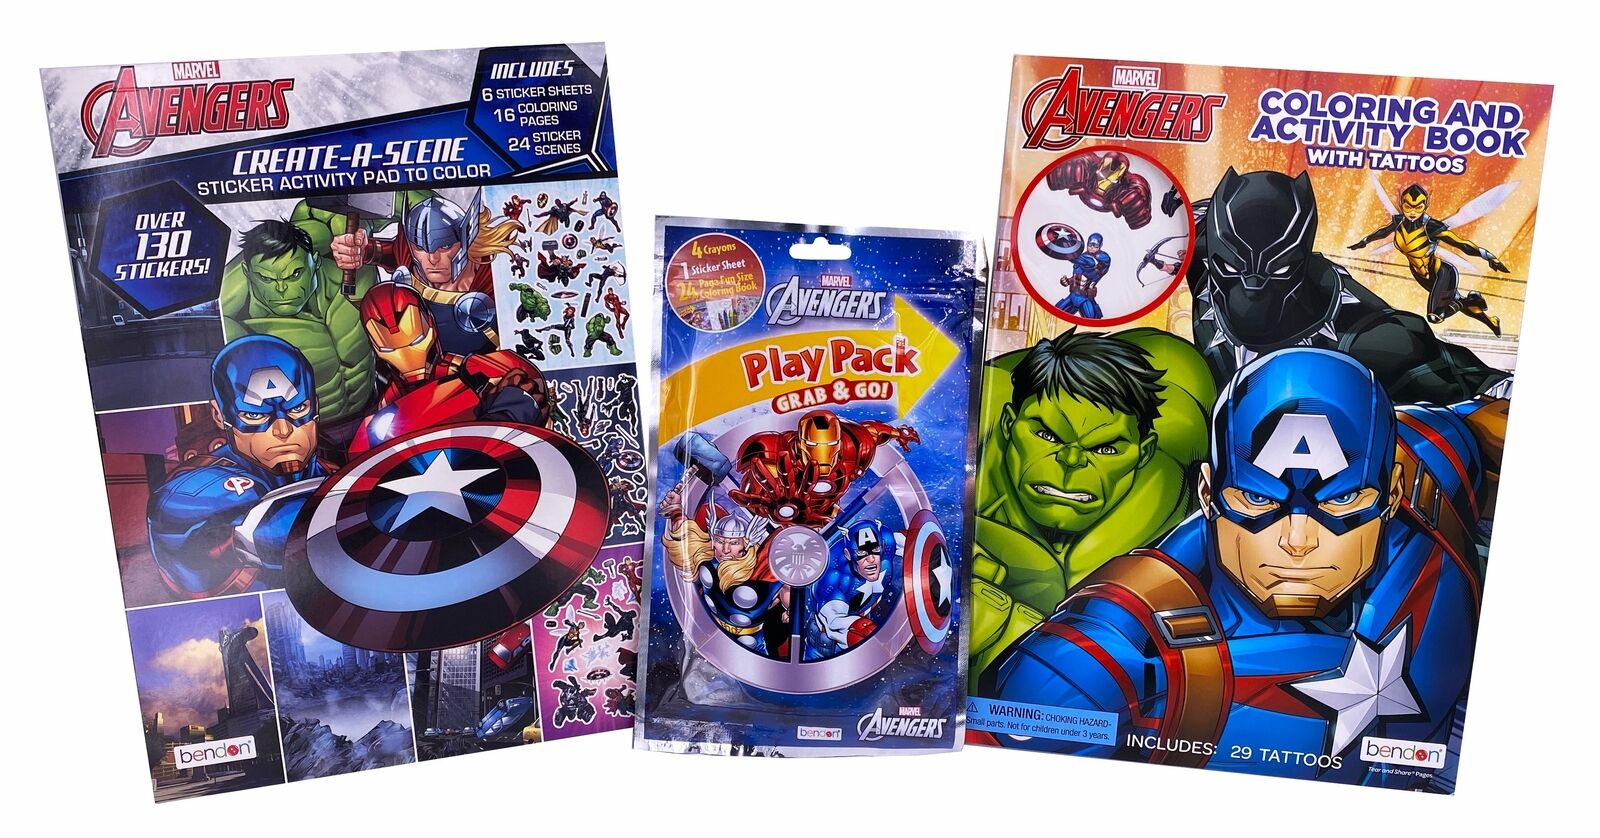 Marvel Avengers Coloring Book And Sticker Activity Pad With Tattoos, Stickers An